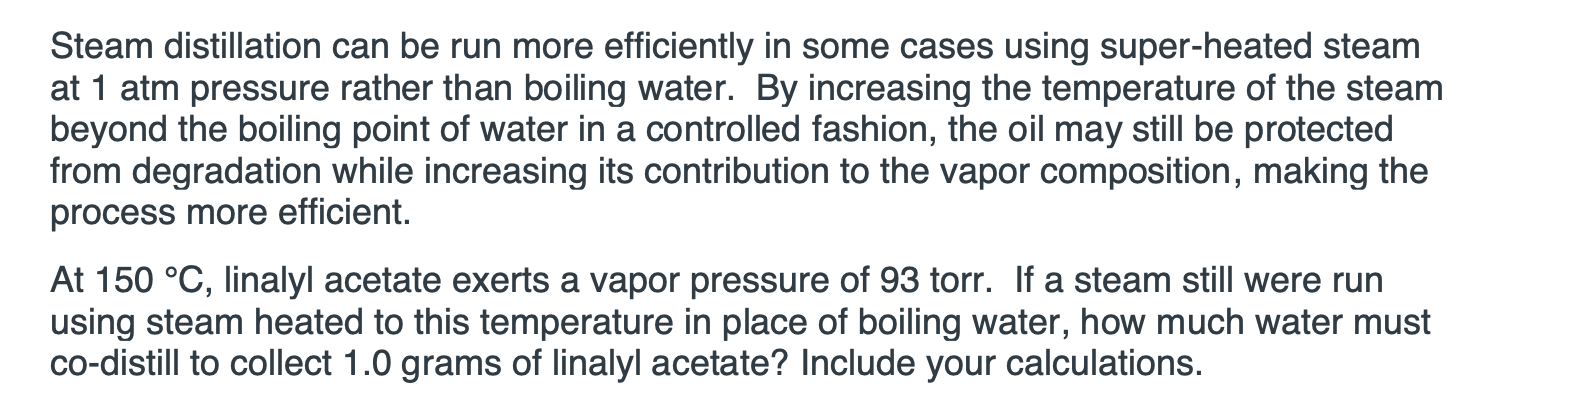 At 150 °C, linalyl acetate exerts a vapor pressure of 93 tor. If a steam still were run
using steam heated to this temperature in place of boiling water, how much water must
co-distill to collect 1.0 grams of linalyl acetate? Include your calculations.
